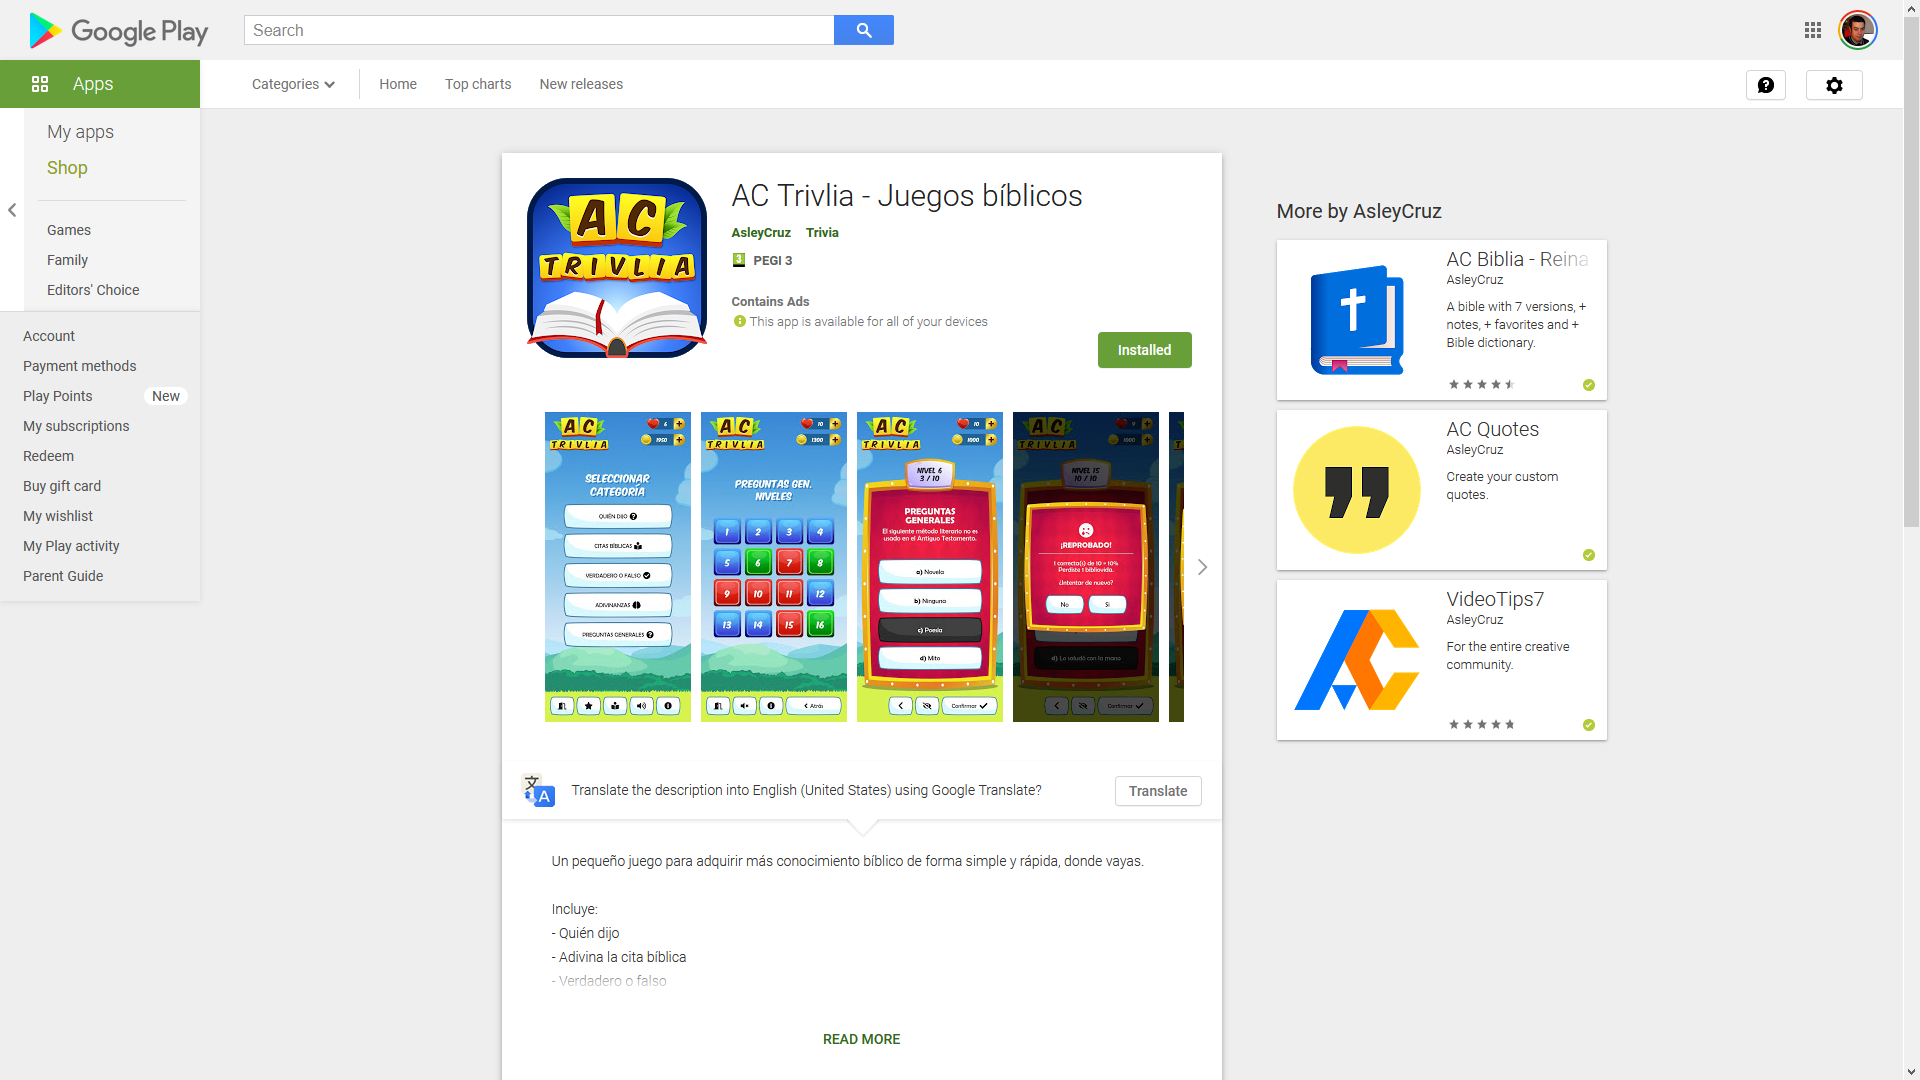 AC-Trivlia in the Google Play store